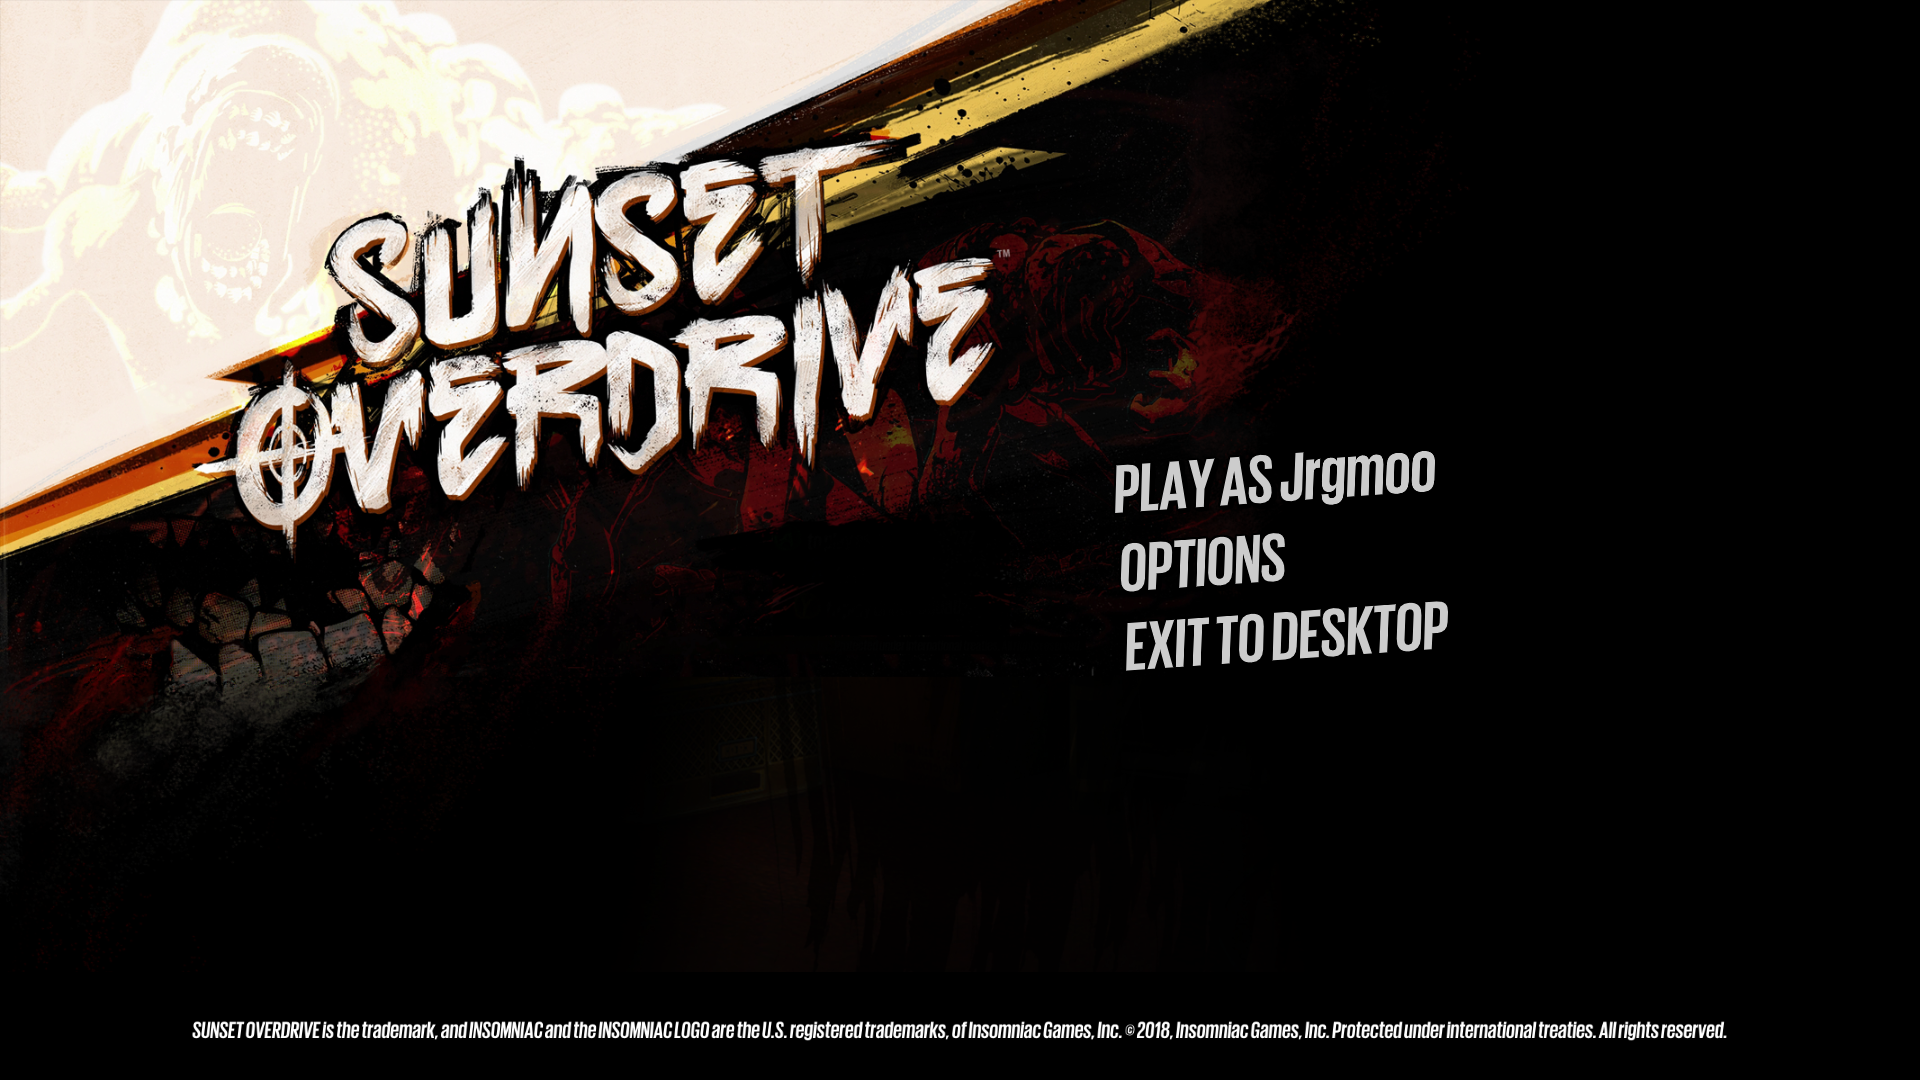 Cannot move on from the start menu on sunset overdrive gamepass PC [​IMG]